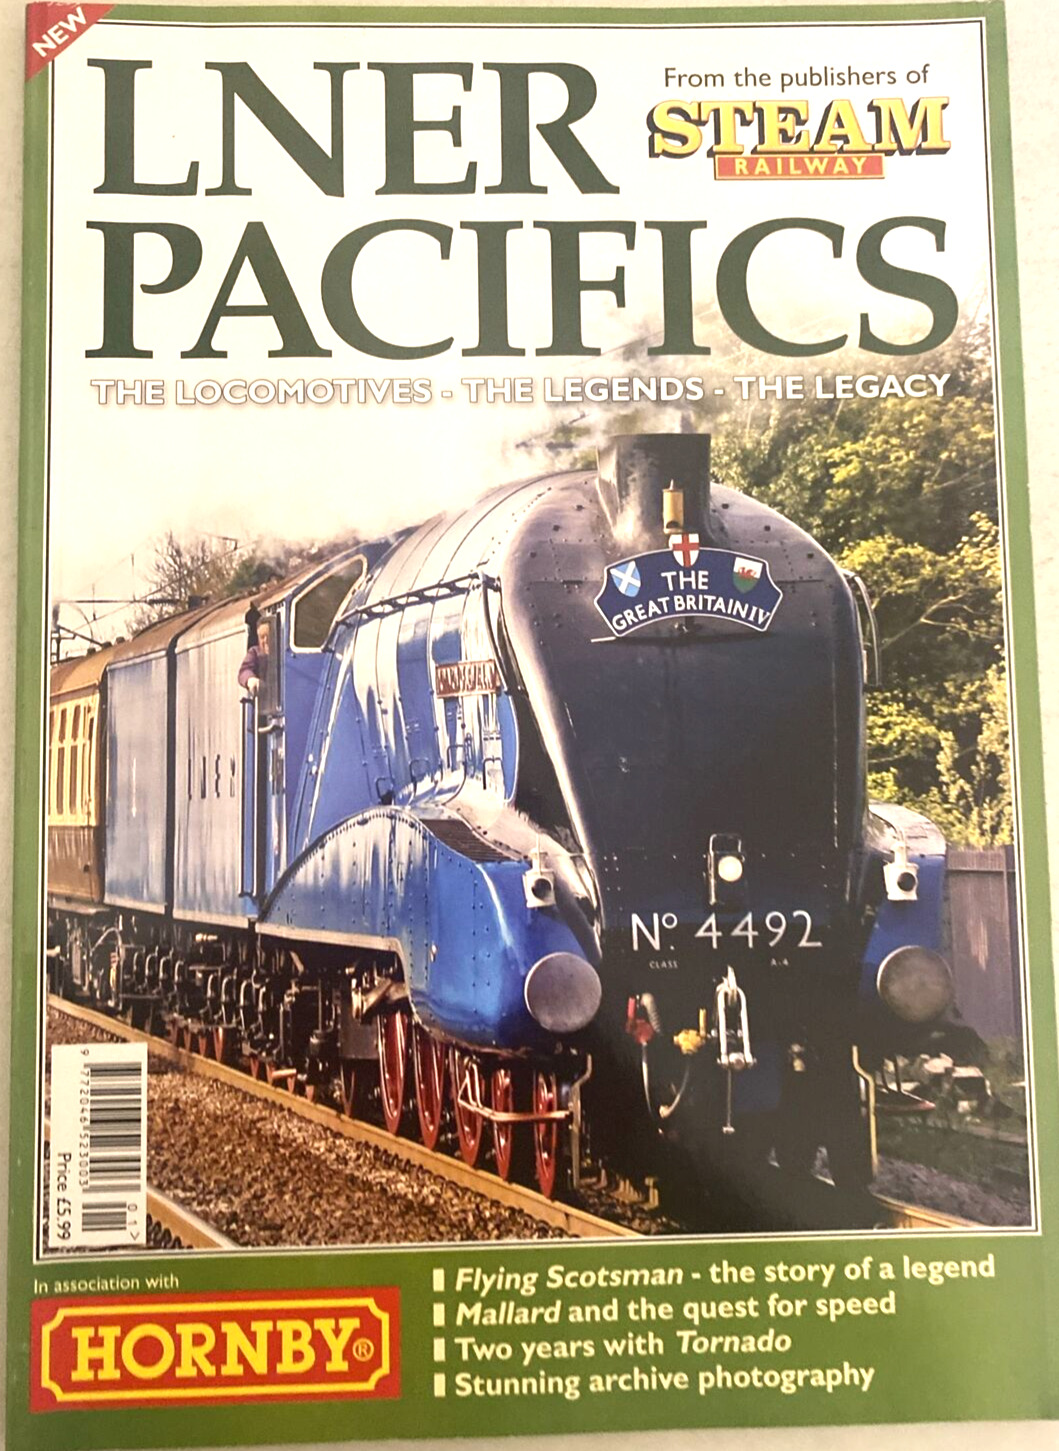 LNER PACIFICS. # 7.  FROM THE PUBLISHERS STEAM RAILWAY.  IN ASSOCIATION HORNBY.